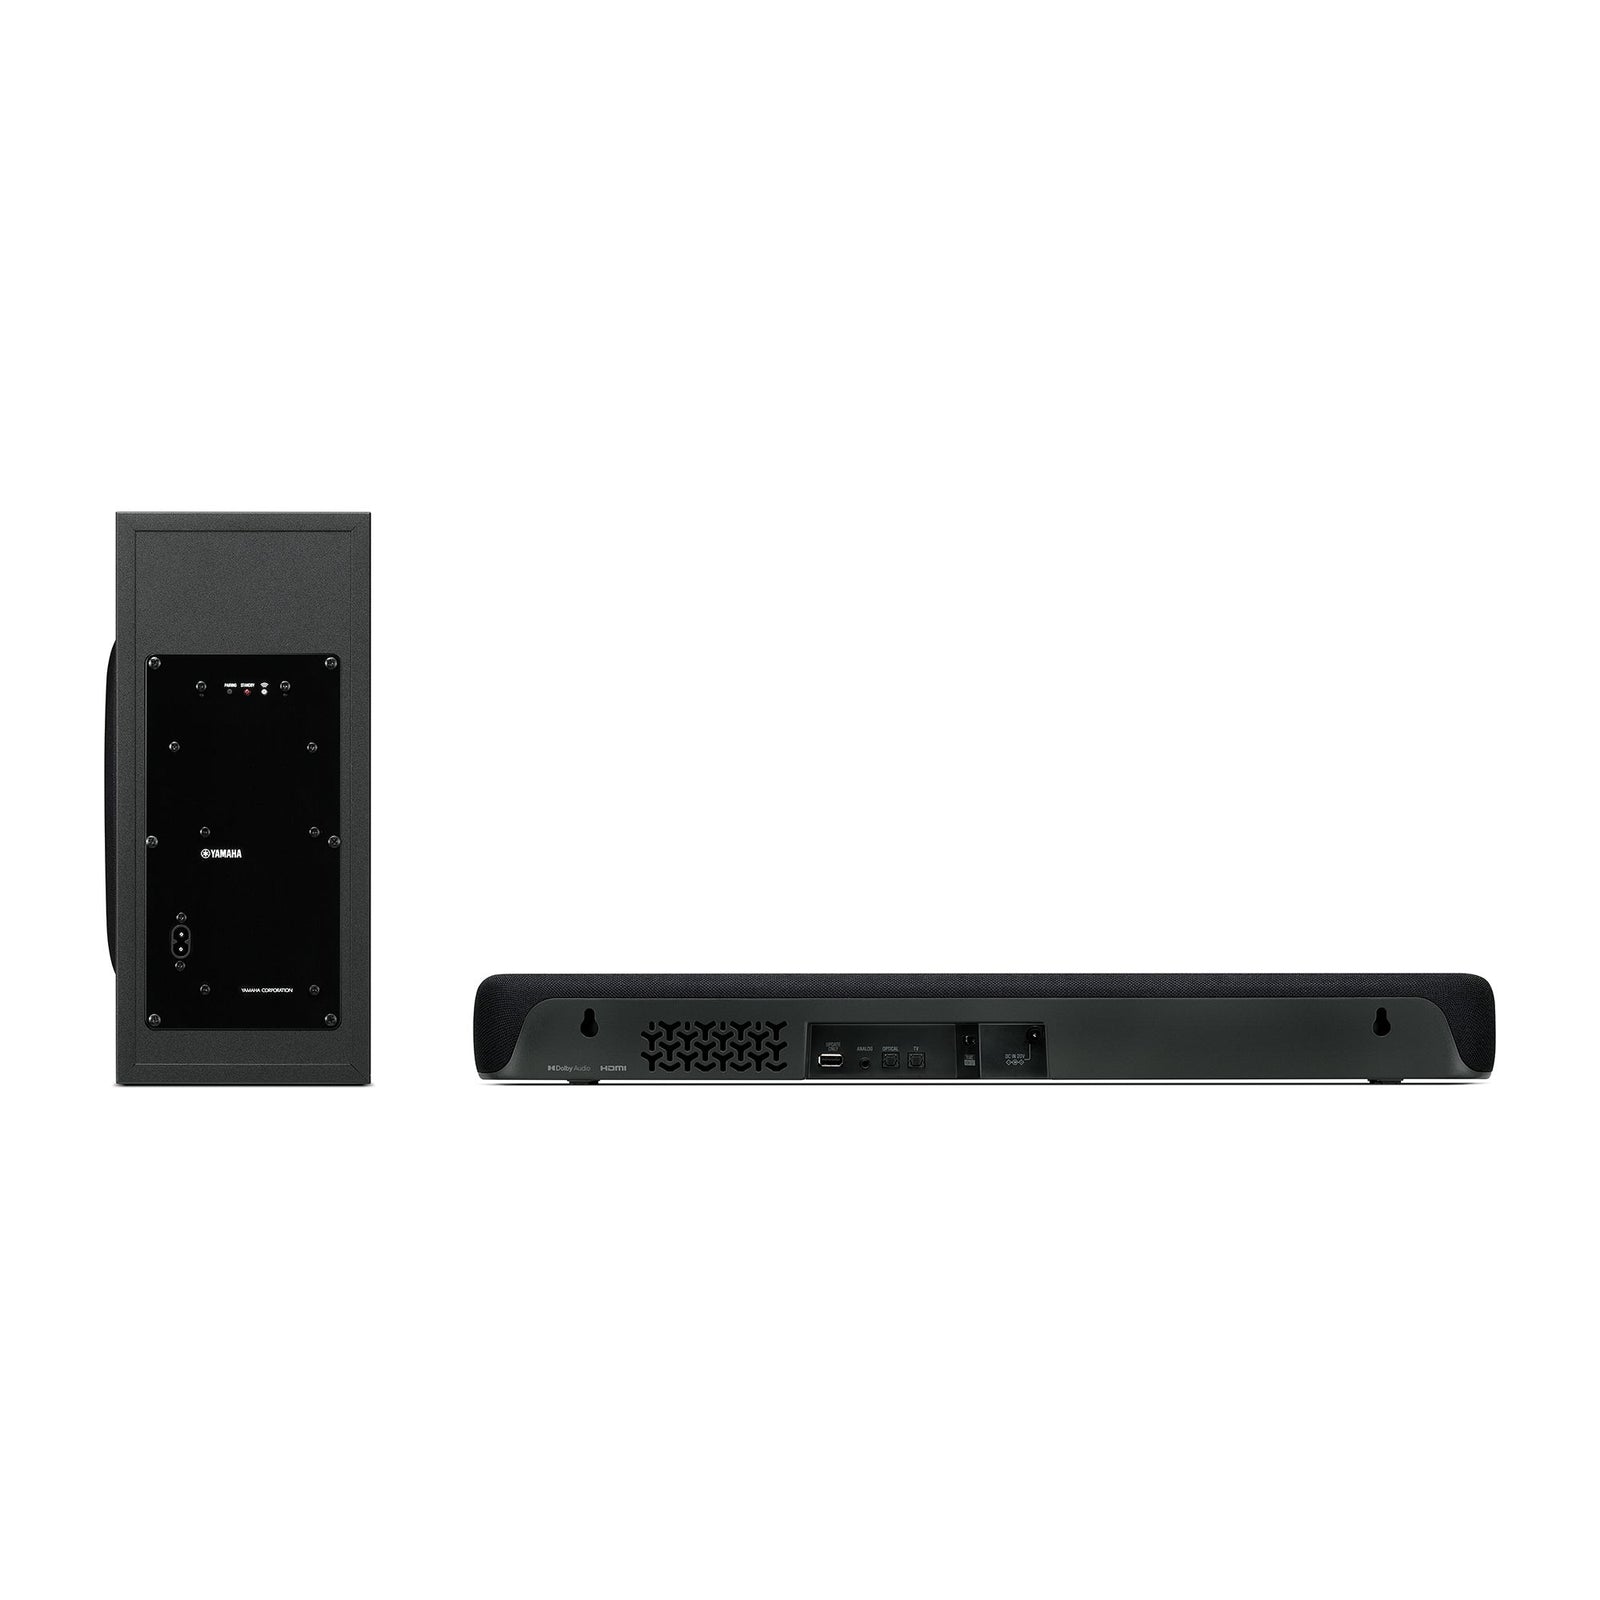 YAMAHA SR-C30A - SOUND BARS | VINYL SOUND Compact Sound Bar and wireless subwoofer. Compact center unit and subwoofer (CU: W600mm x H64mm x D94mm, SW: W335mm x H160mm x D364mm) Connectivity: Bluetooth®, HDMI™ (ARC), digital optical, and analog audio 4 sound modes: Stereo, Standard, 3D Movie, and Game. Clear voice for more audible human voices